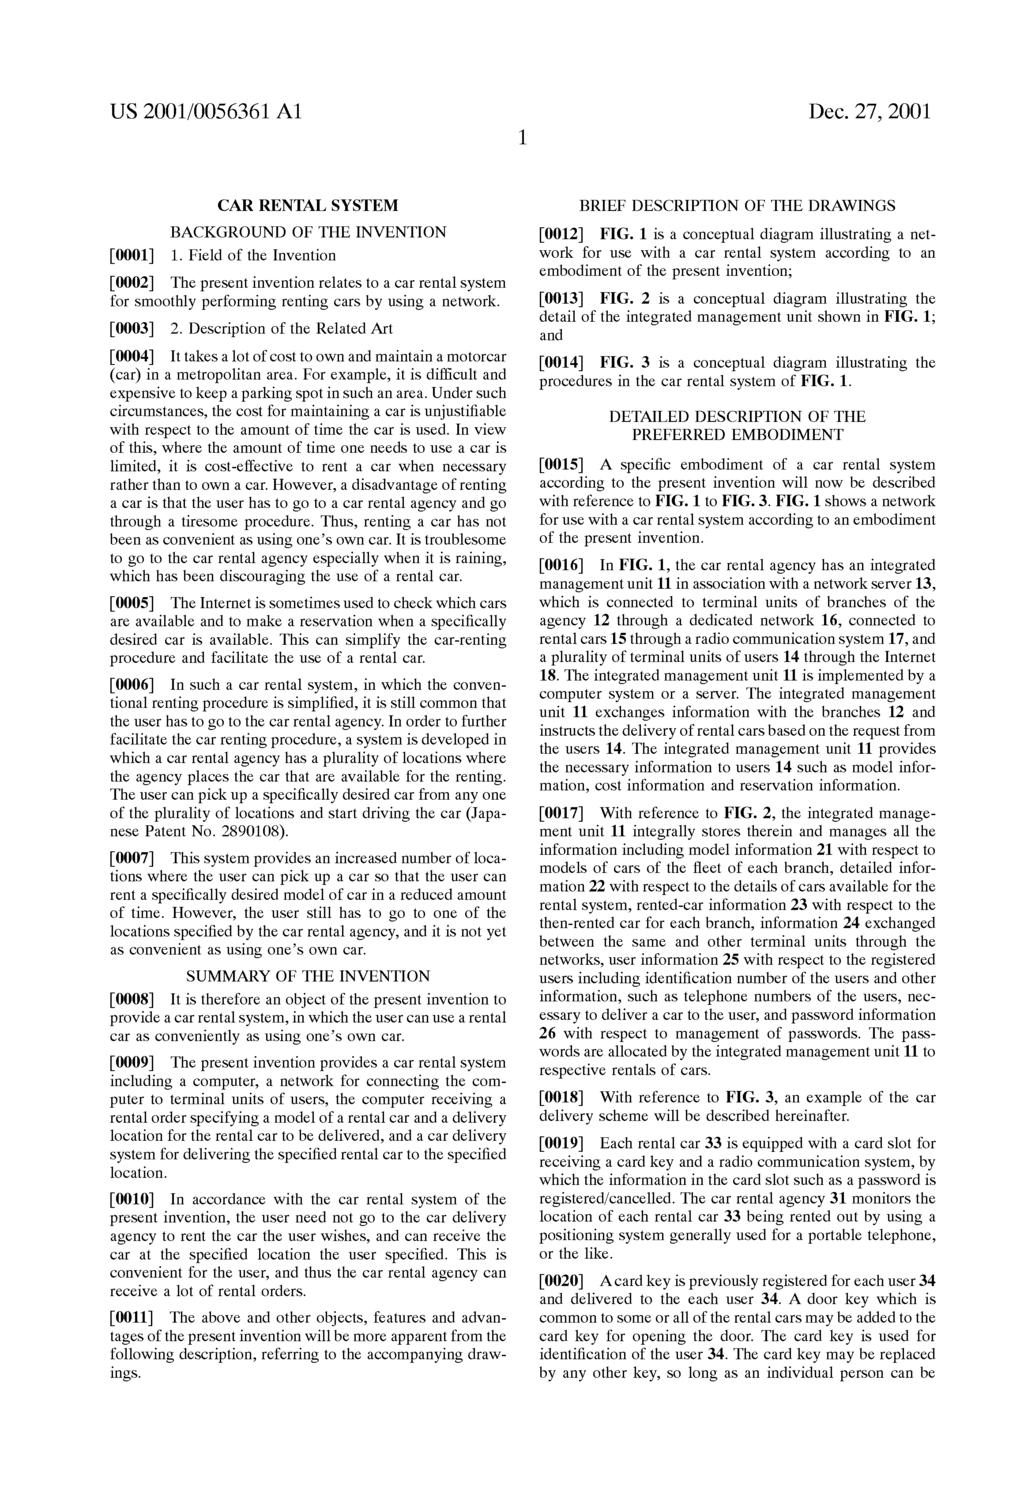 US 2001/0056361 A1 Dec. 27, 2001 CARRENTAL SYSTEM BACKGROUND OF THE INVENTION 0001) 1.